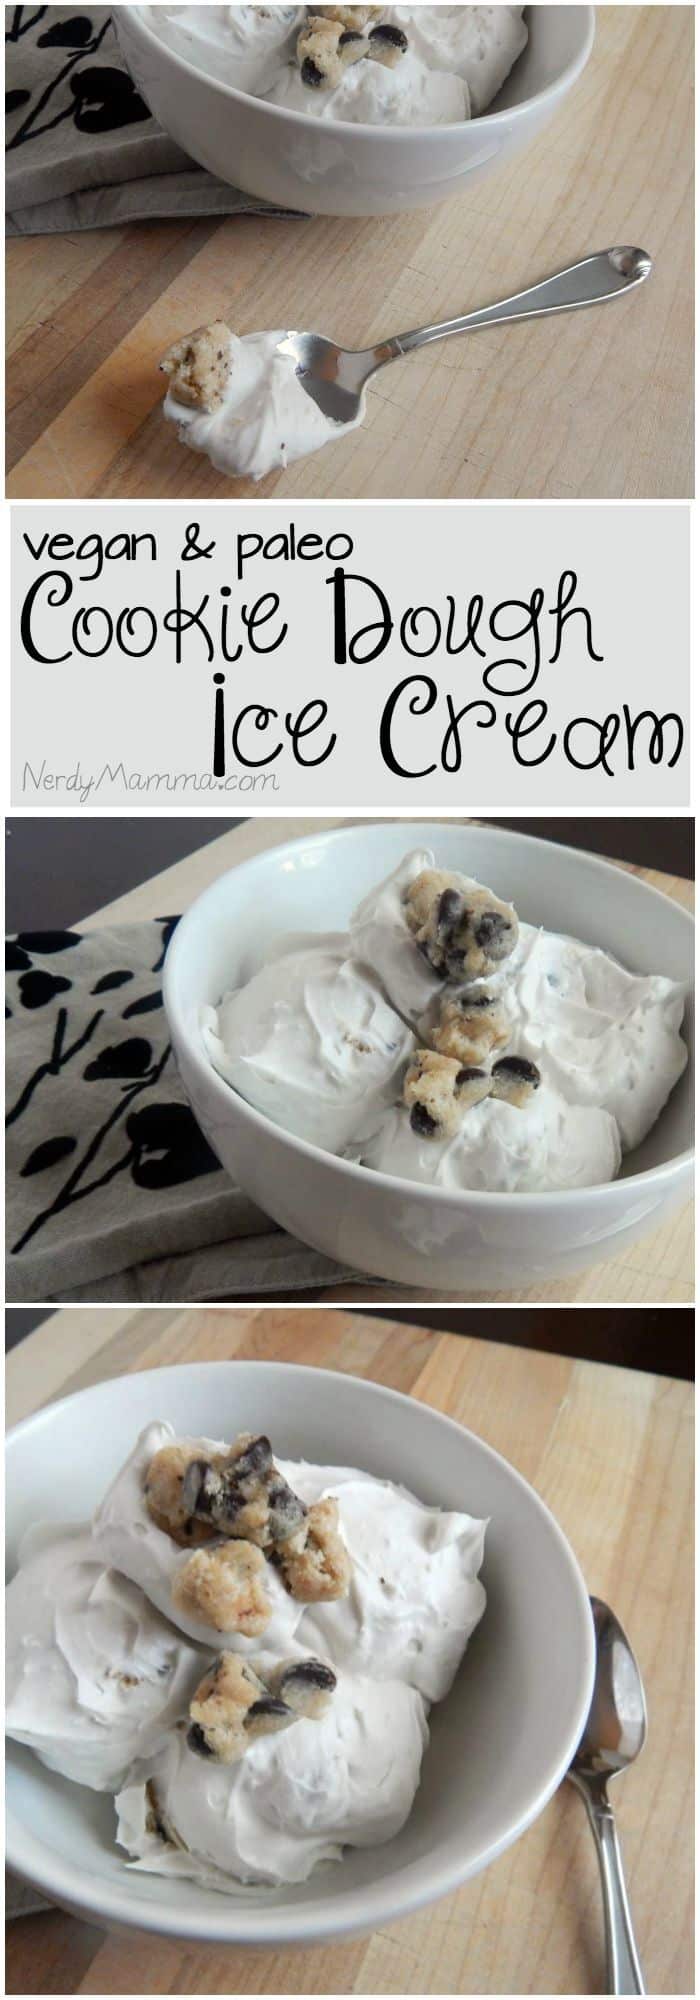 My kids and I just can't stop eating this super-easy coconut milk ice cream with cookie dough chunks!